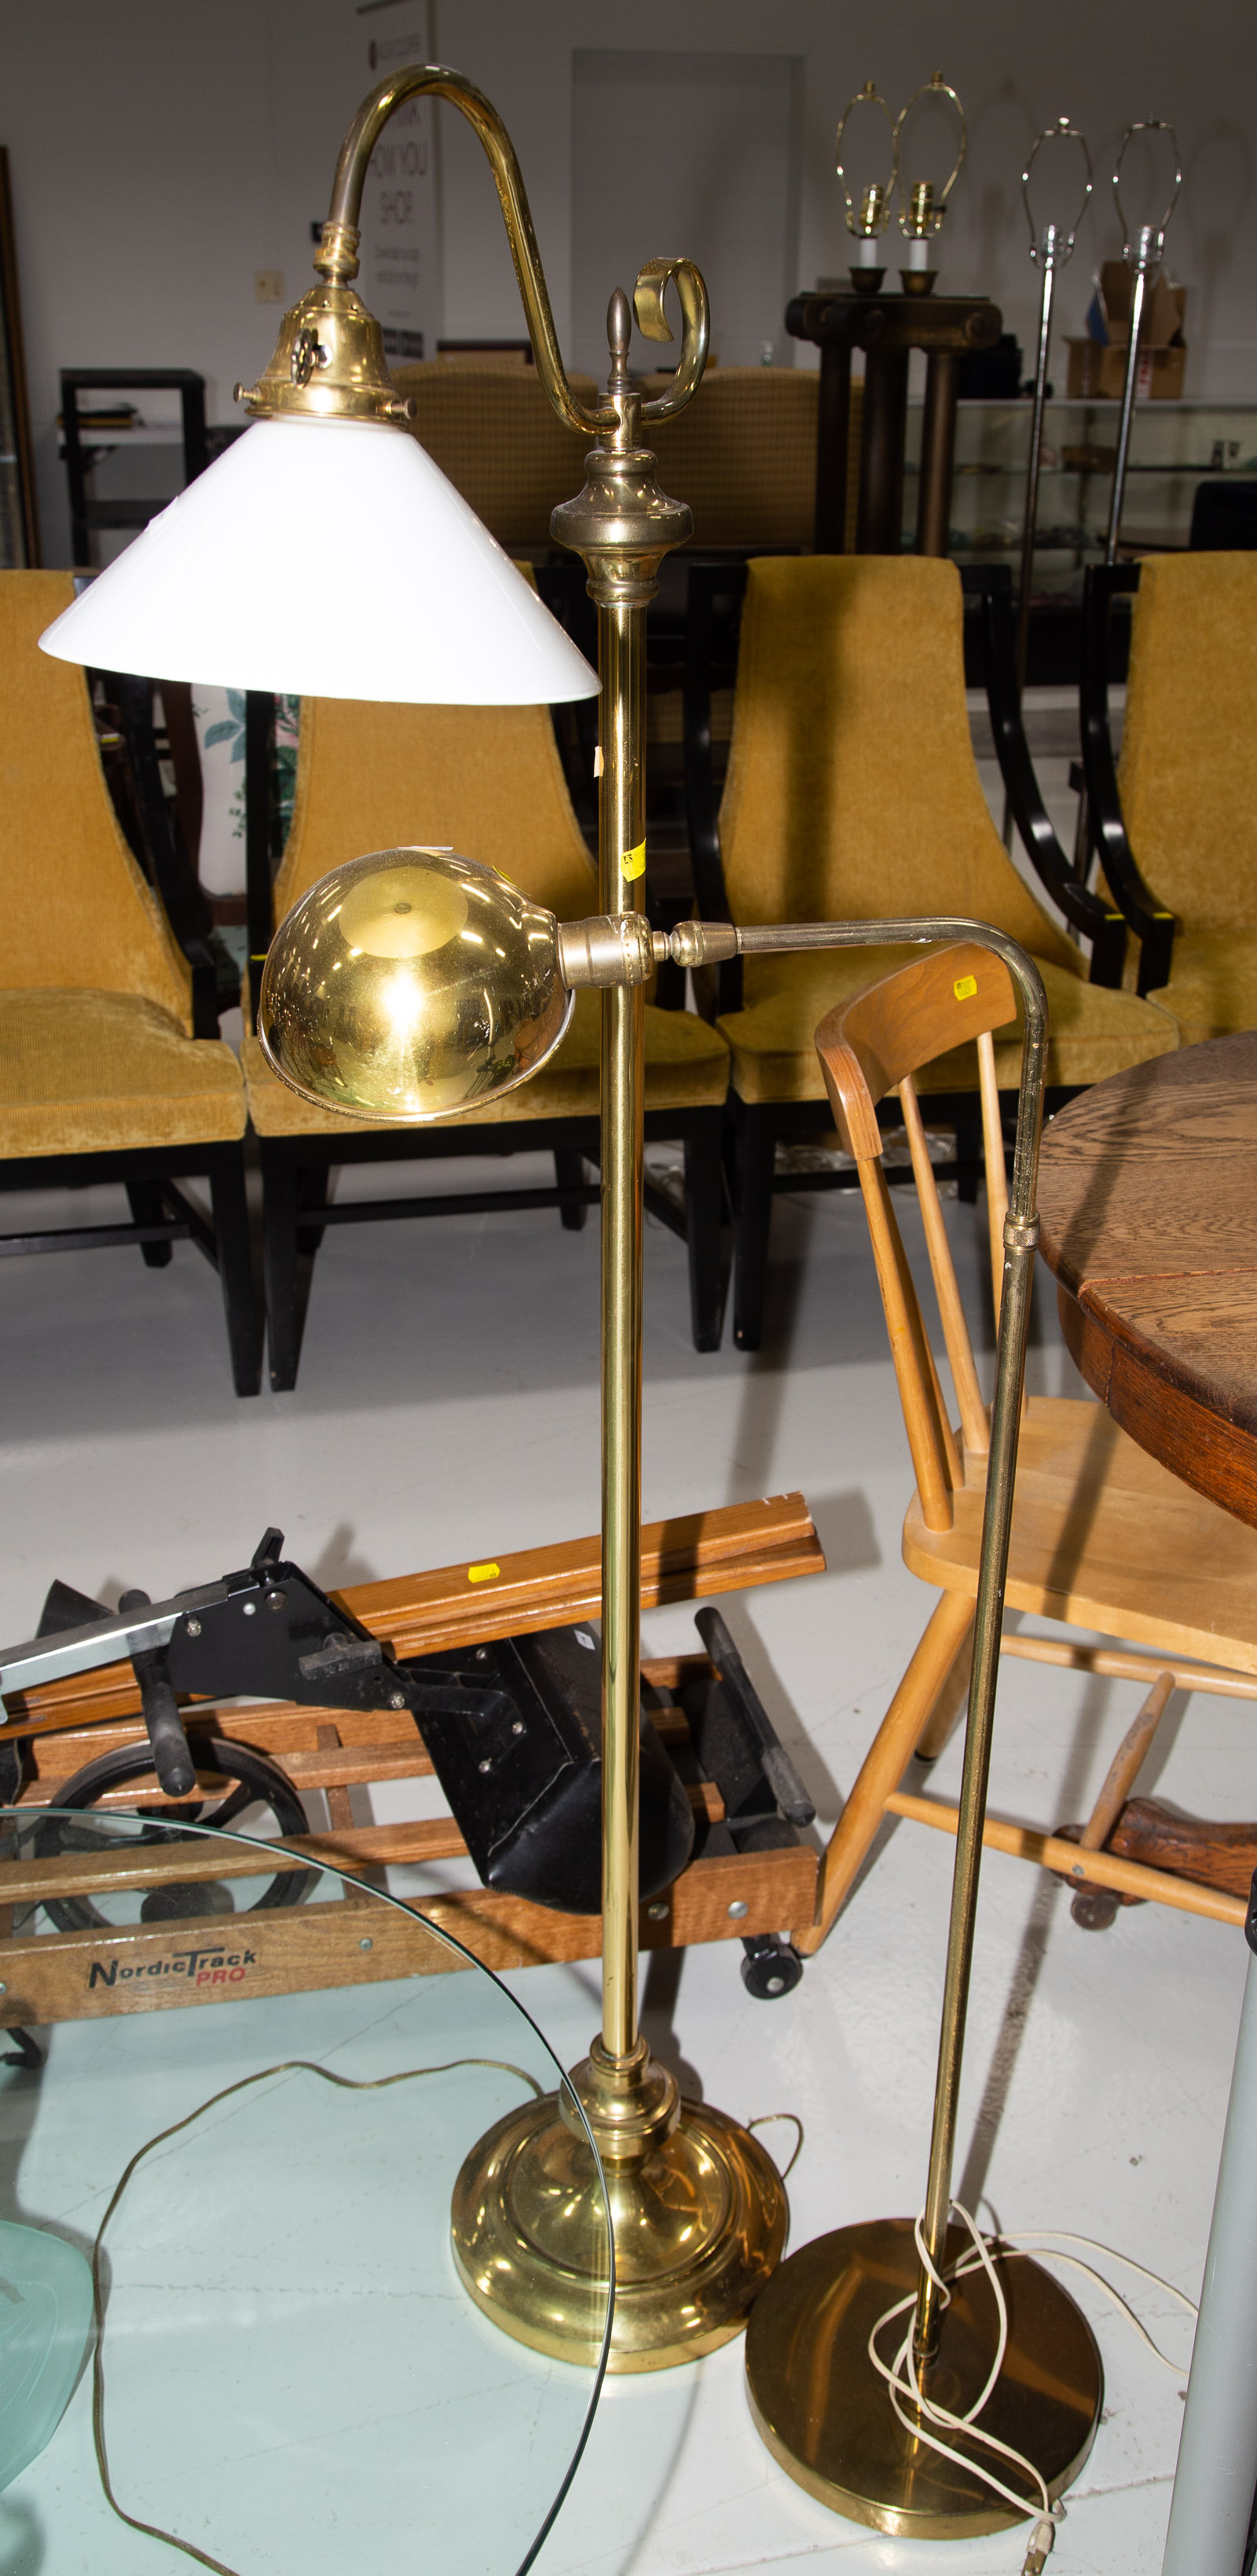 TWO MODERN BRASS FLOOR LAMPS Approximately